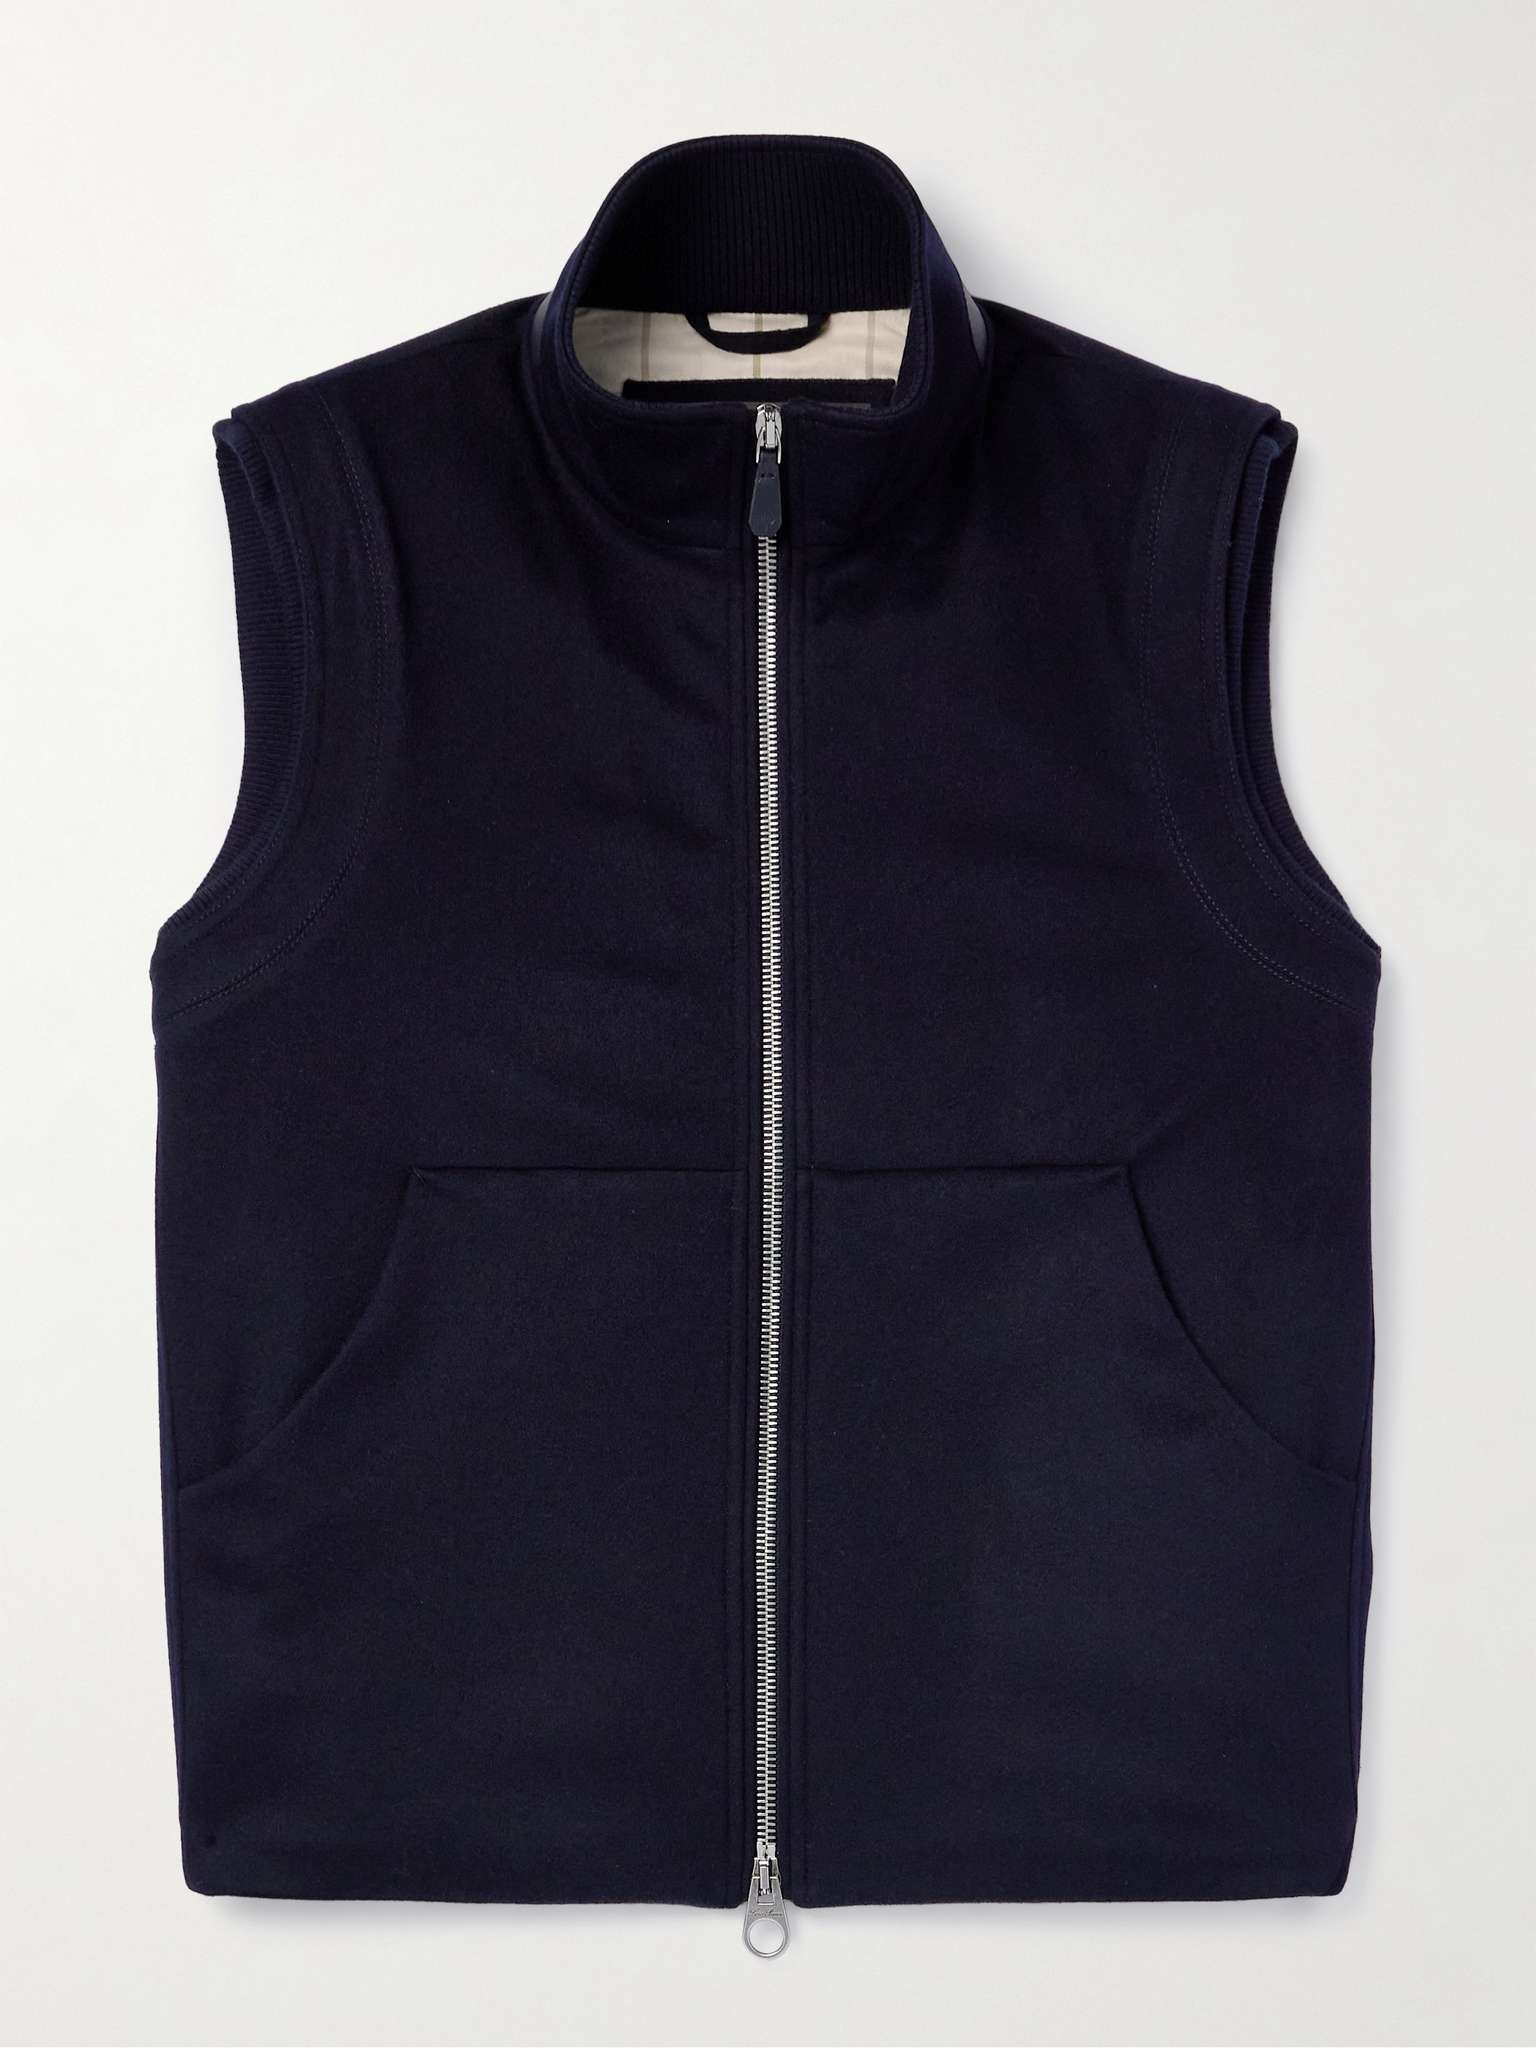 Ume Leather-Trimmed Cashmere Zip-Up Gilet - 1